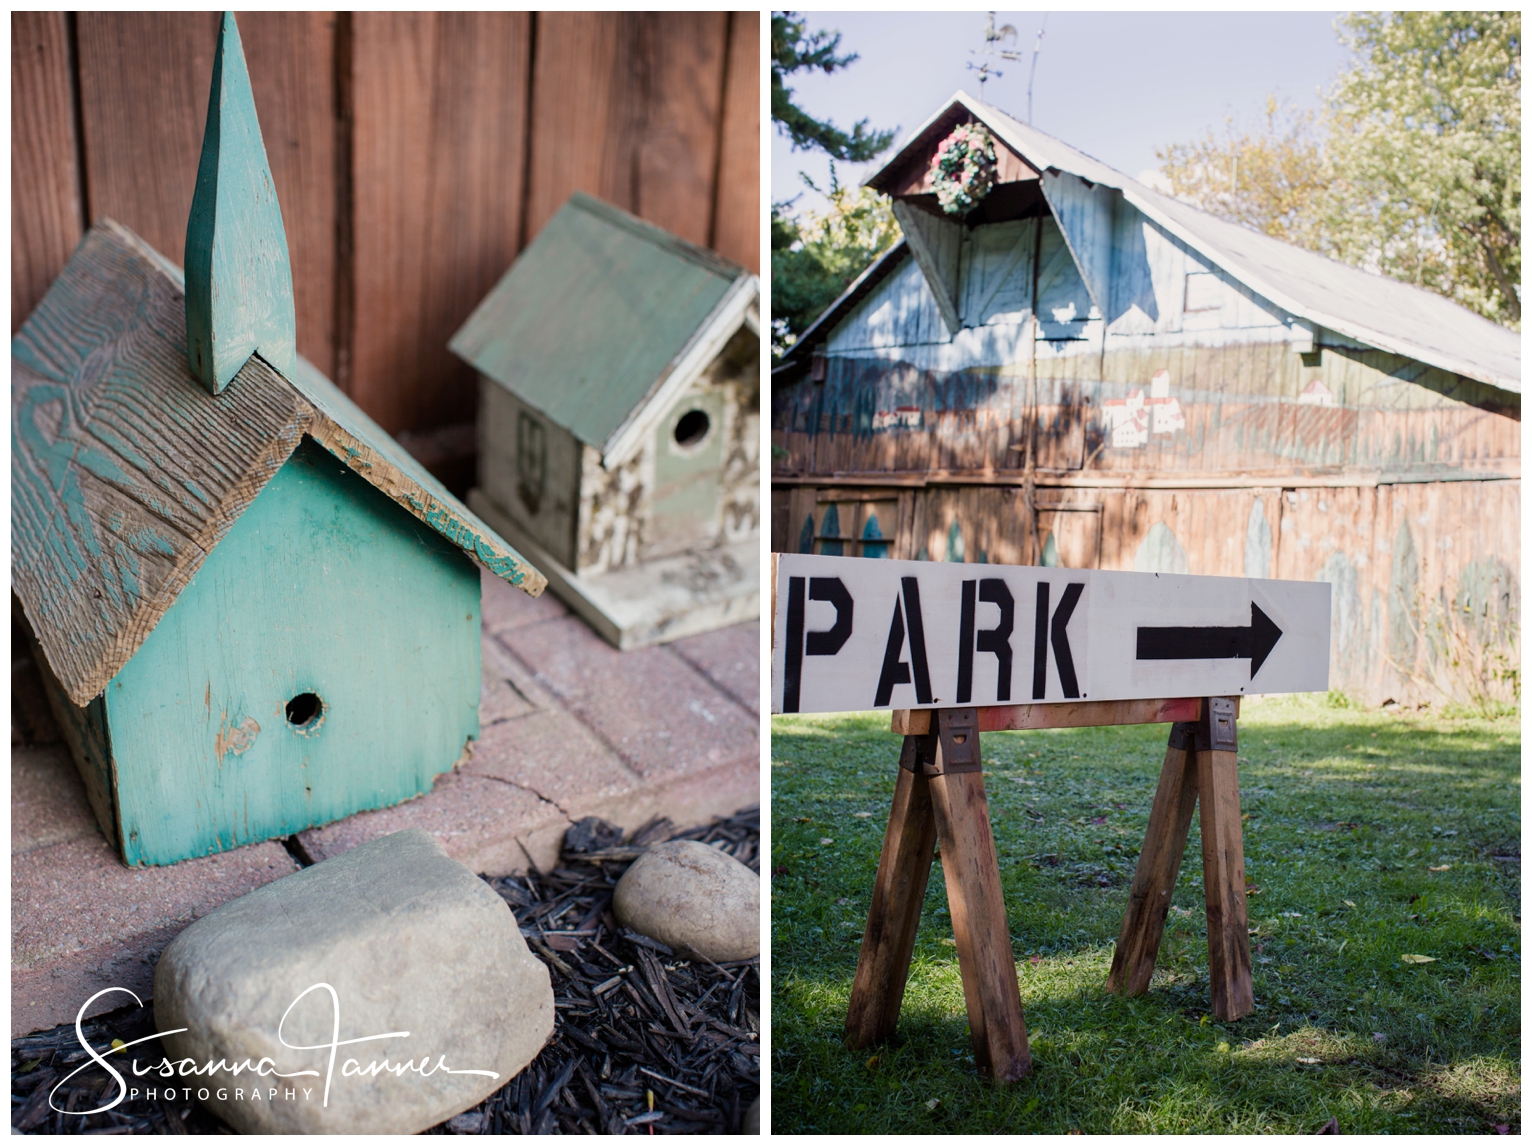 Indianapolis Outdoor Wedding, Turquoise color bird house, parking sign in front of barn